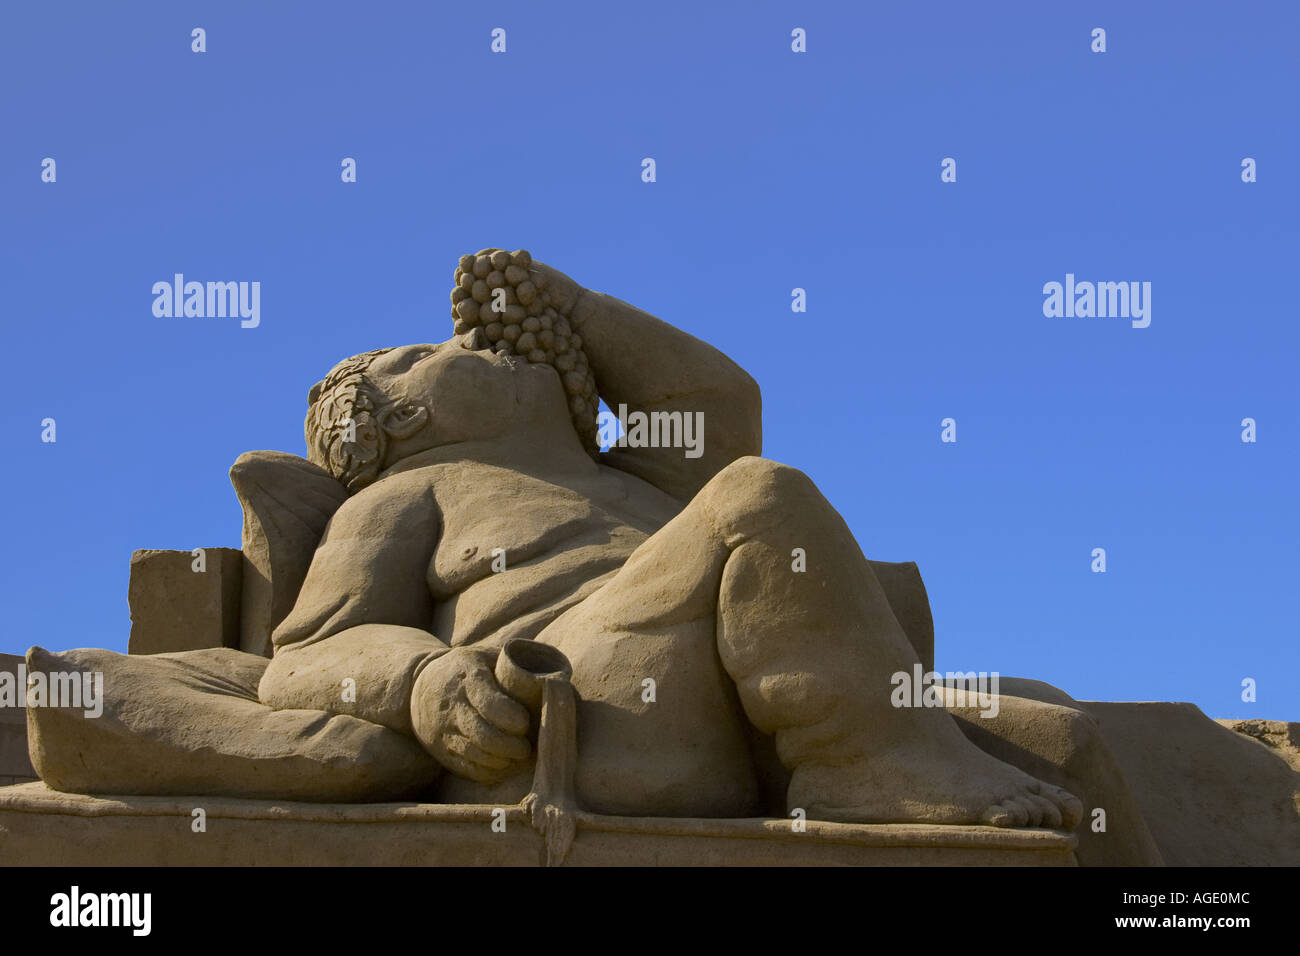 Sand sculpture of Dionysus, god of fruit and wine, at Great Yarmouth sand sculpture festival. Stock Photo